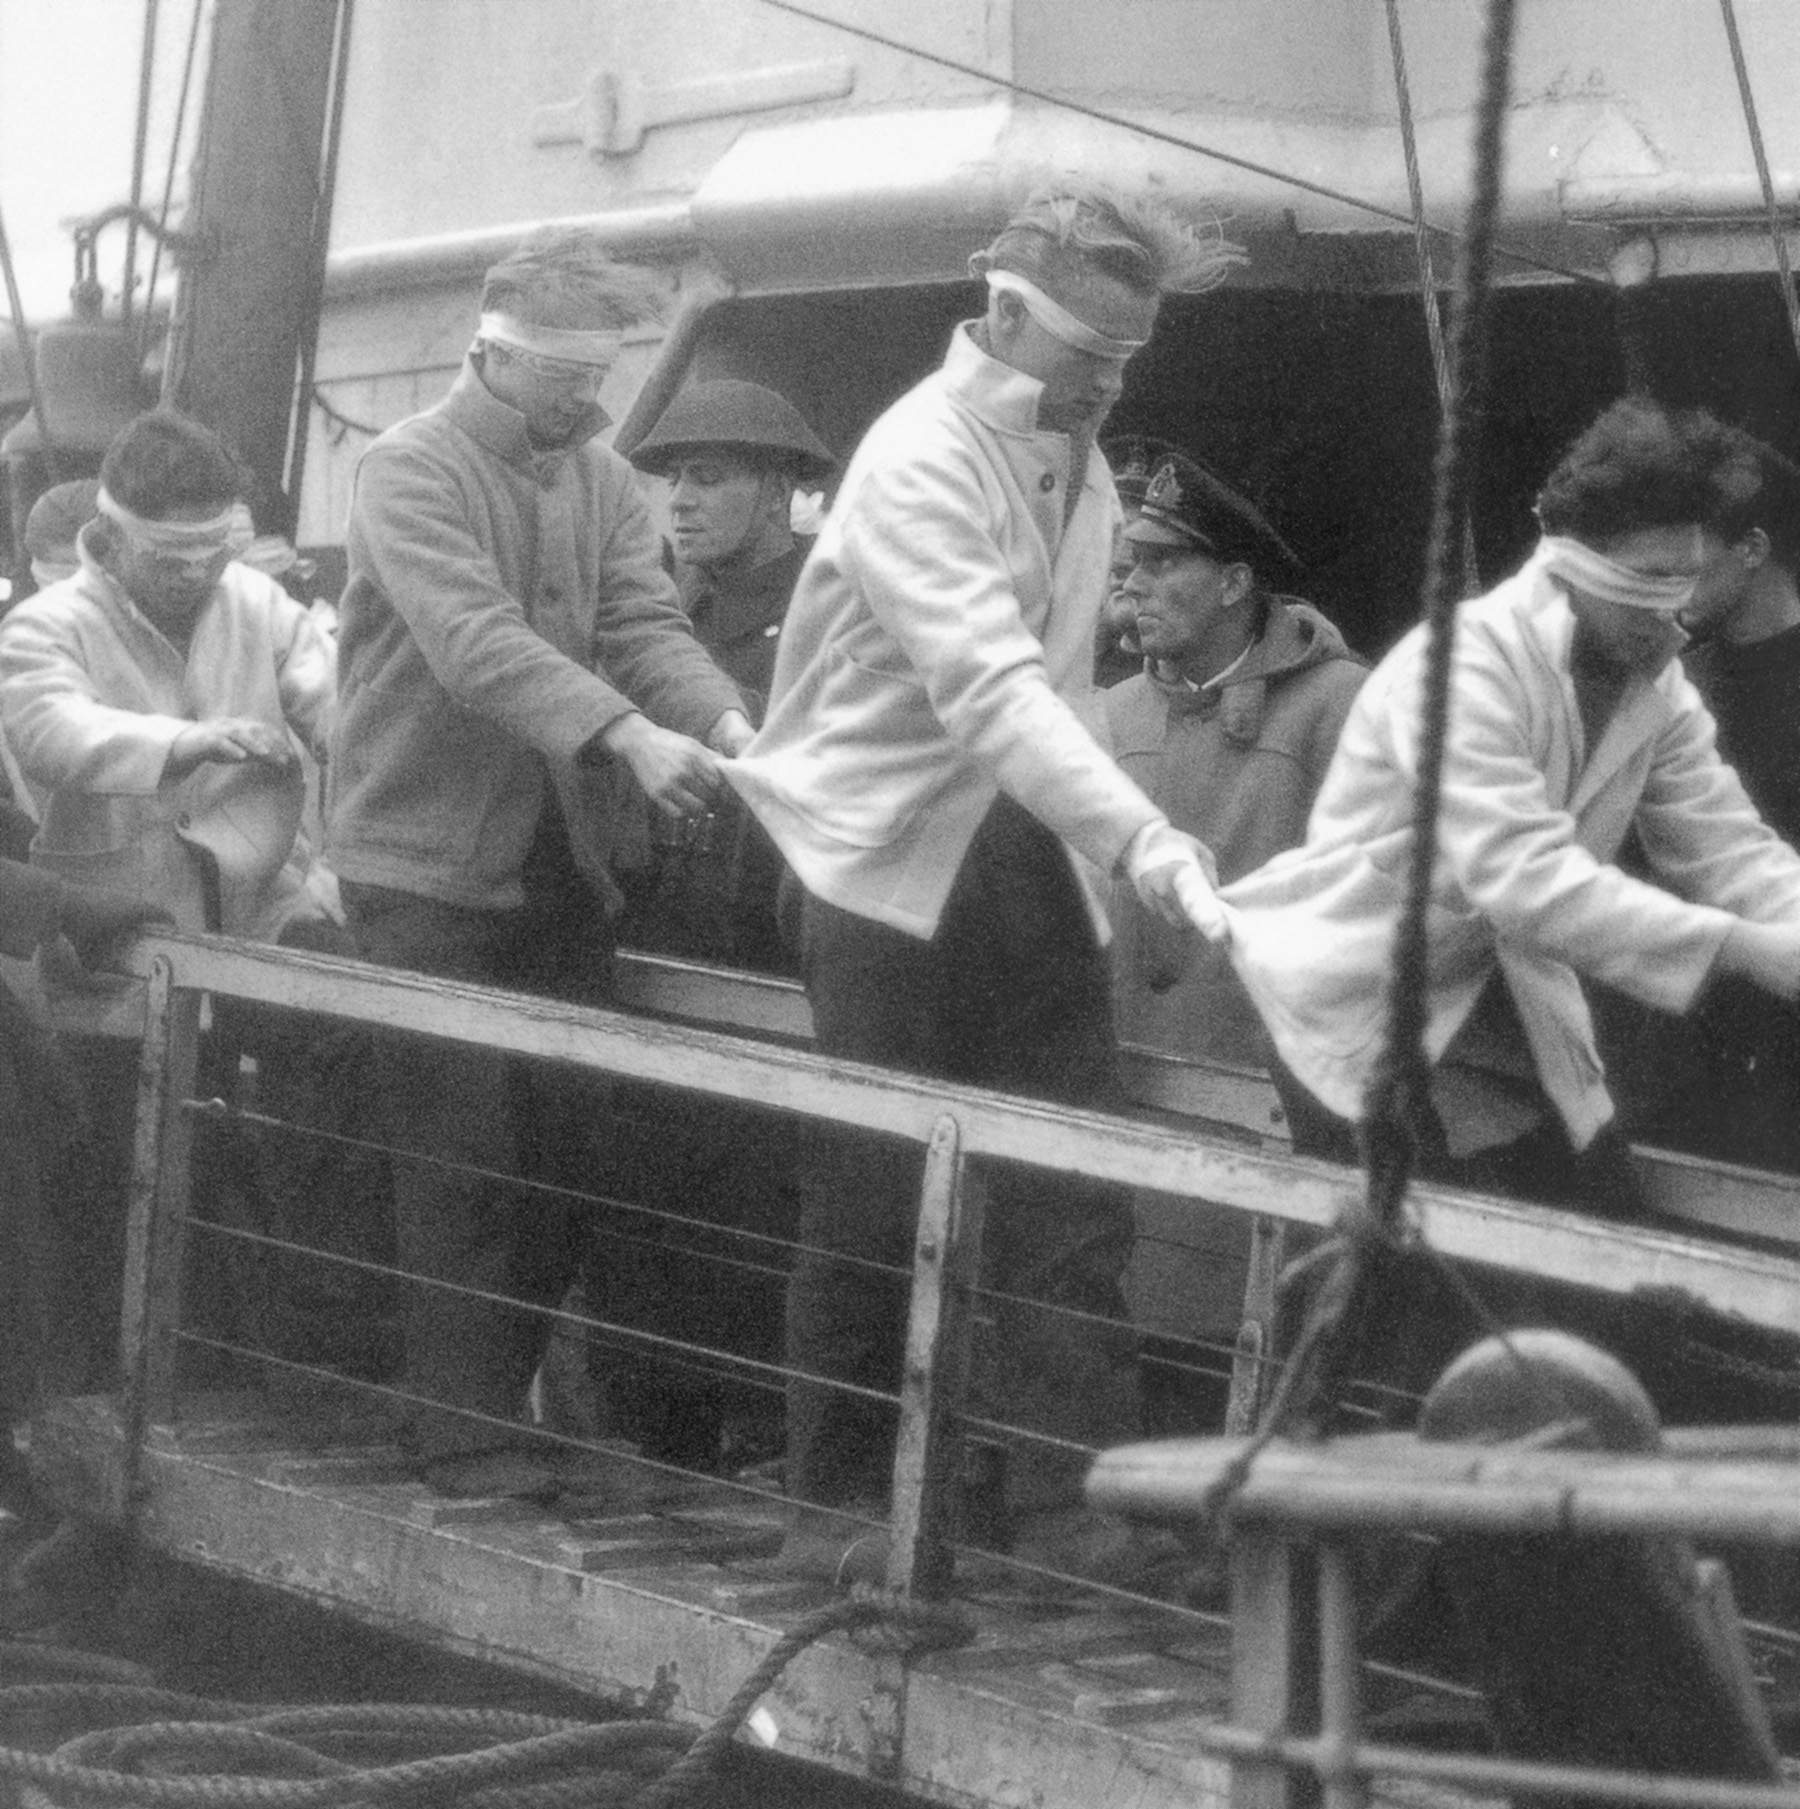 Blindfolded, a few of the 36 survivors of the sinking of the Scharnhorst are led down a gangway into captivity. The German battlecruiser had a complement of 2,000 men.